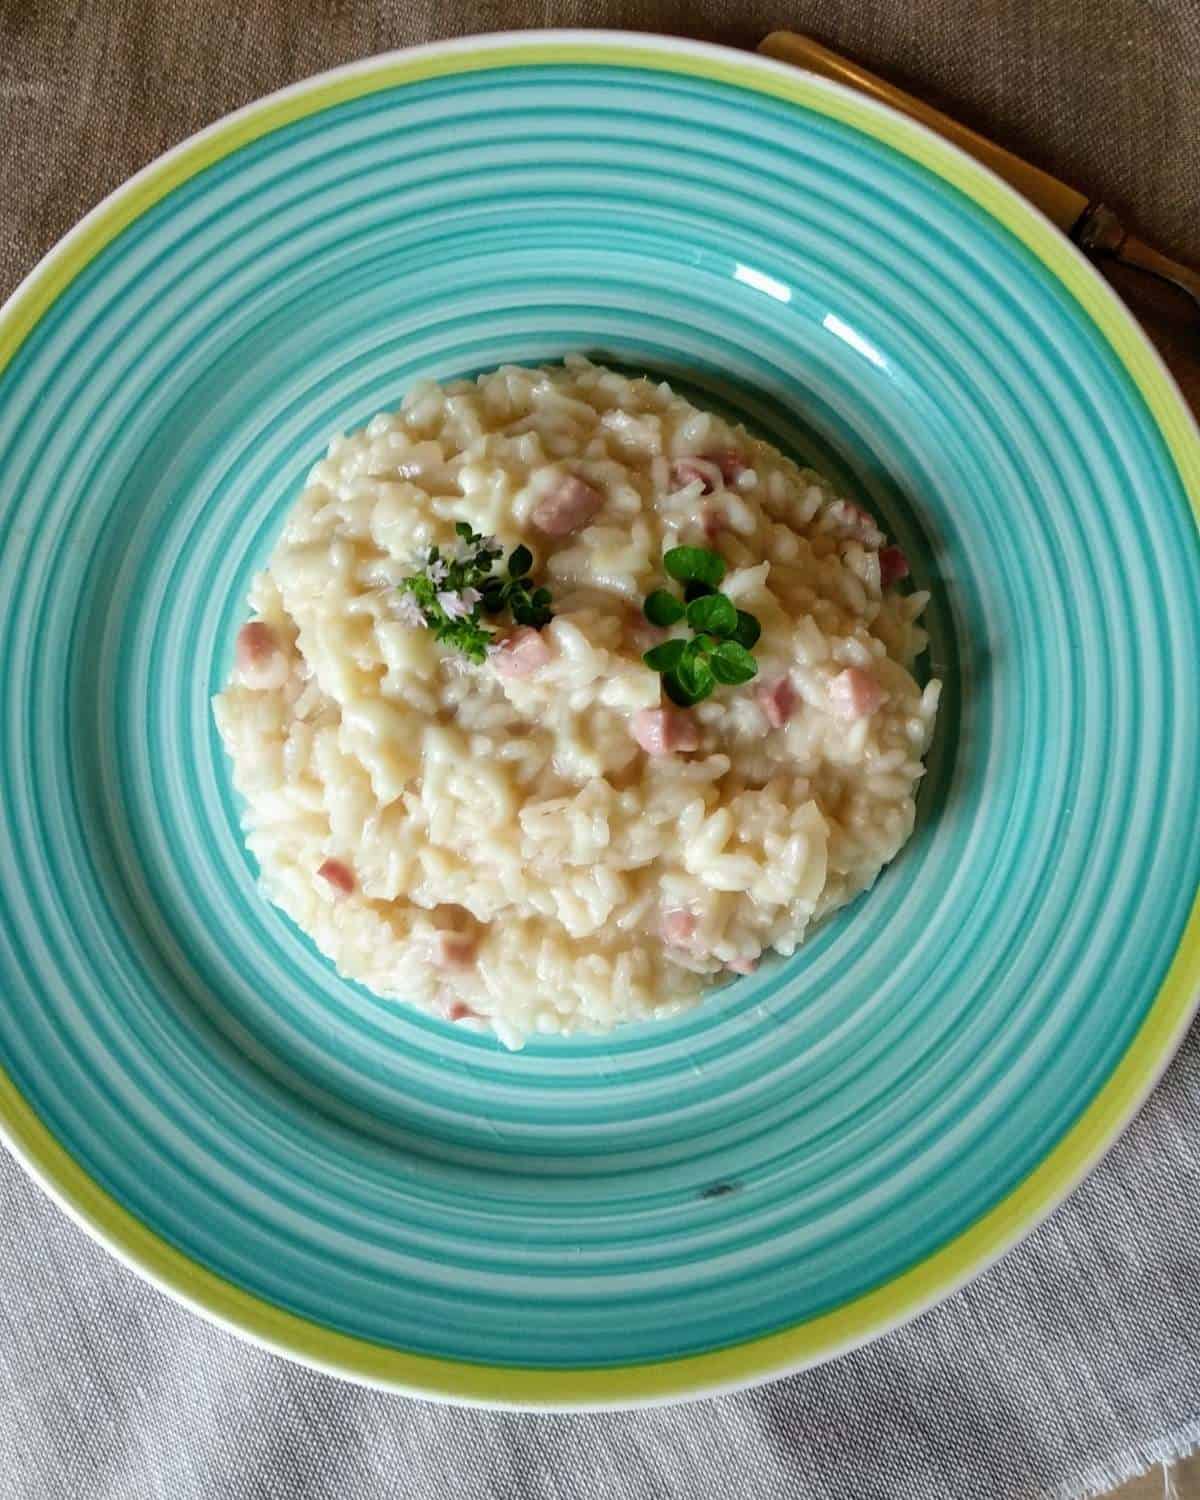 Cheesy-Risotto-with-Pancetta-Bancon on a blue/green dish and wooden table shown from above.